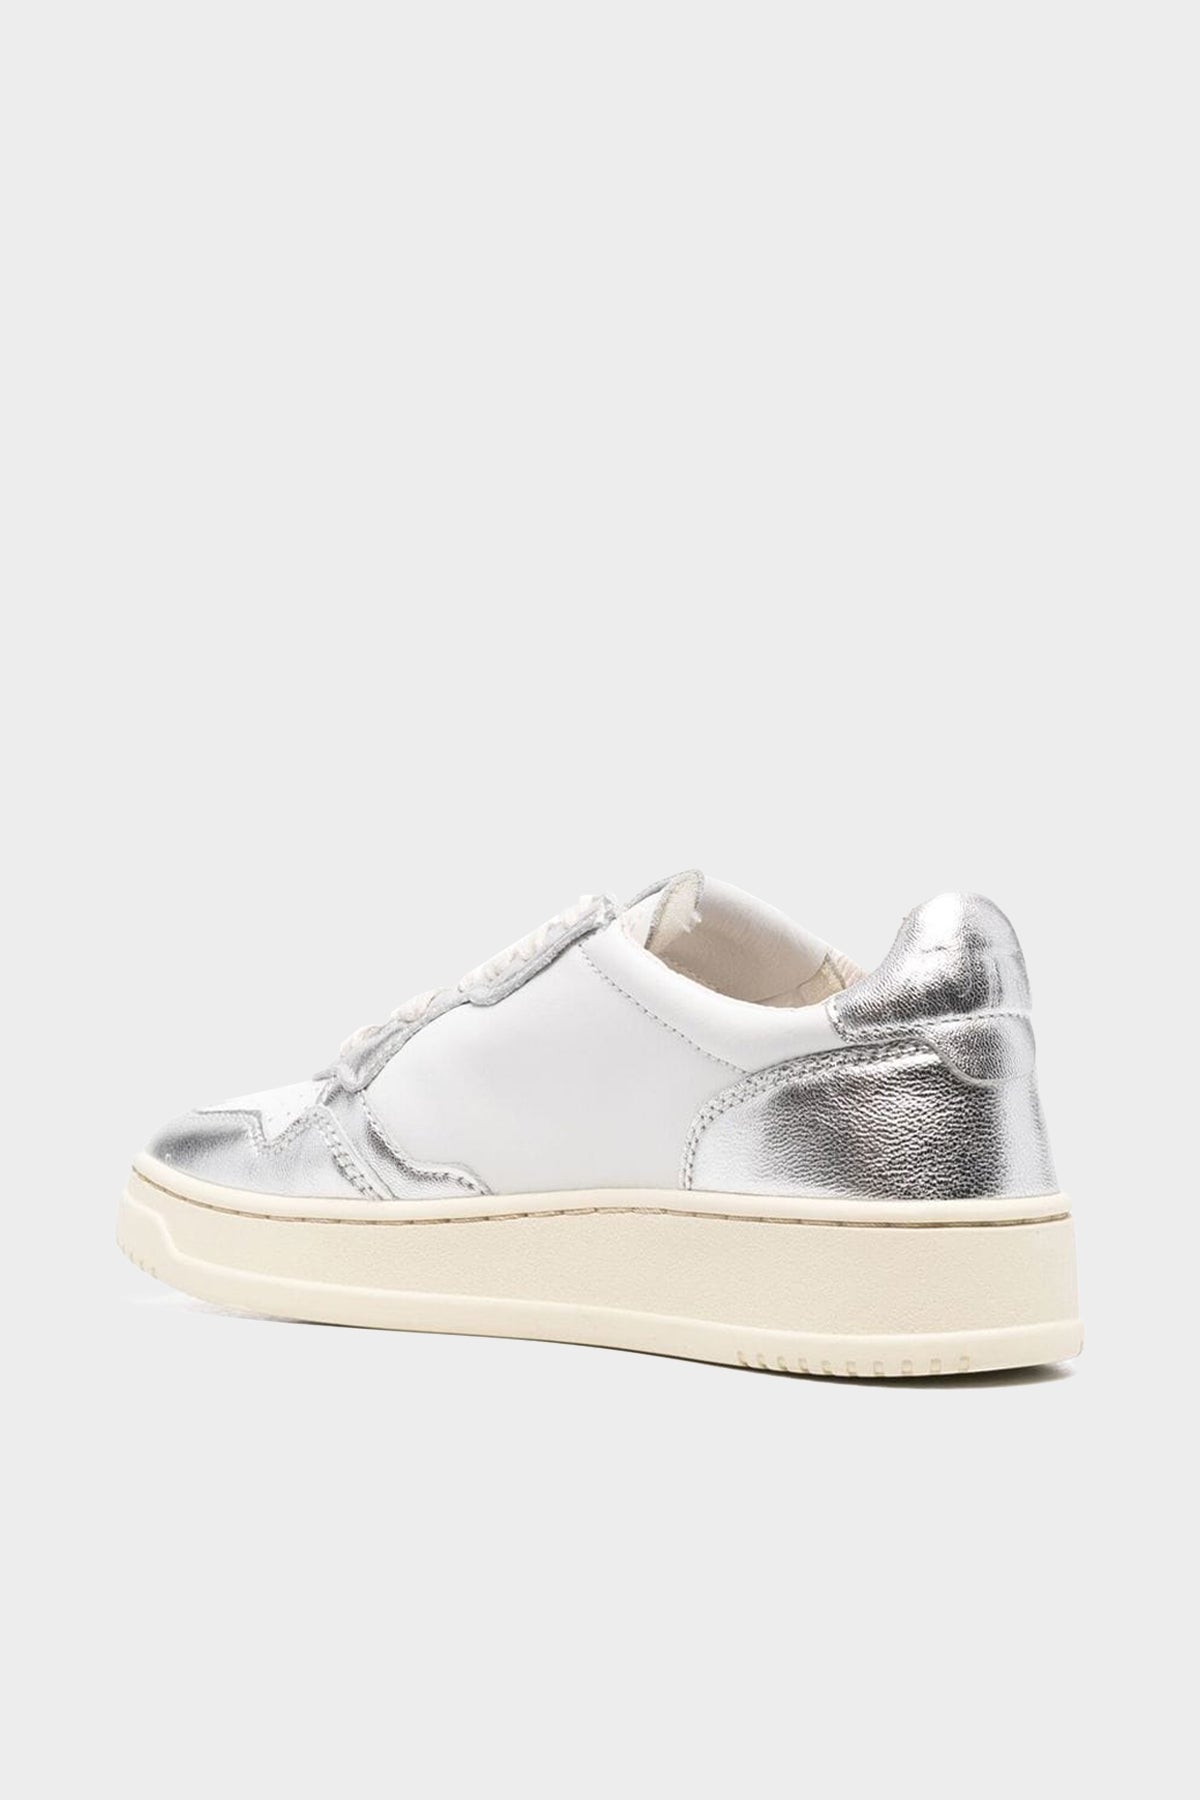 Two-Tone Medalist Low Leather Sneaker in White and Silver - shop-olivia.com